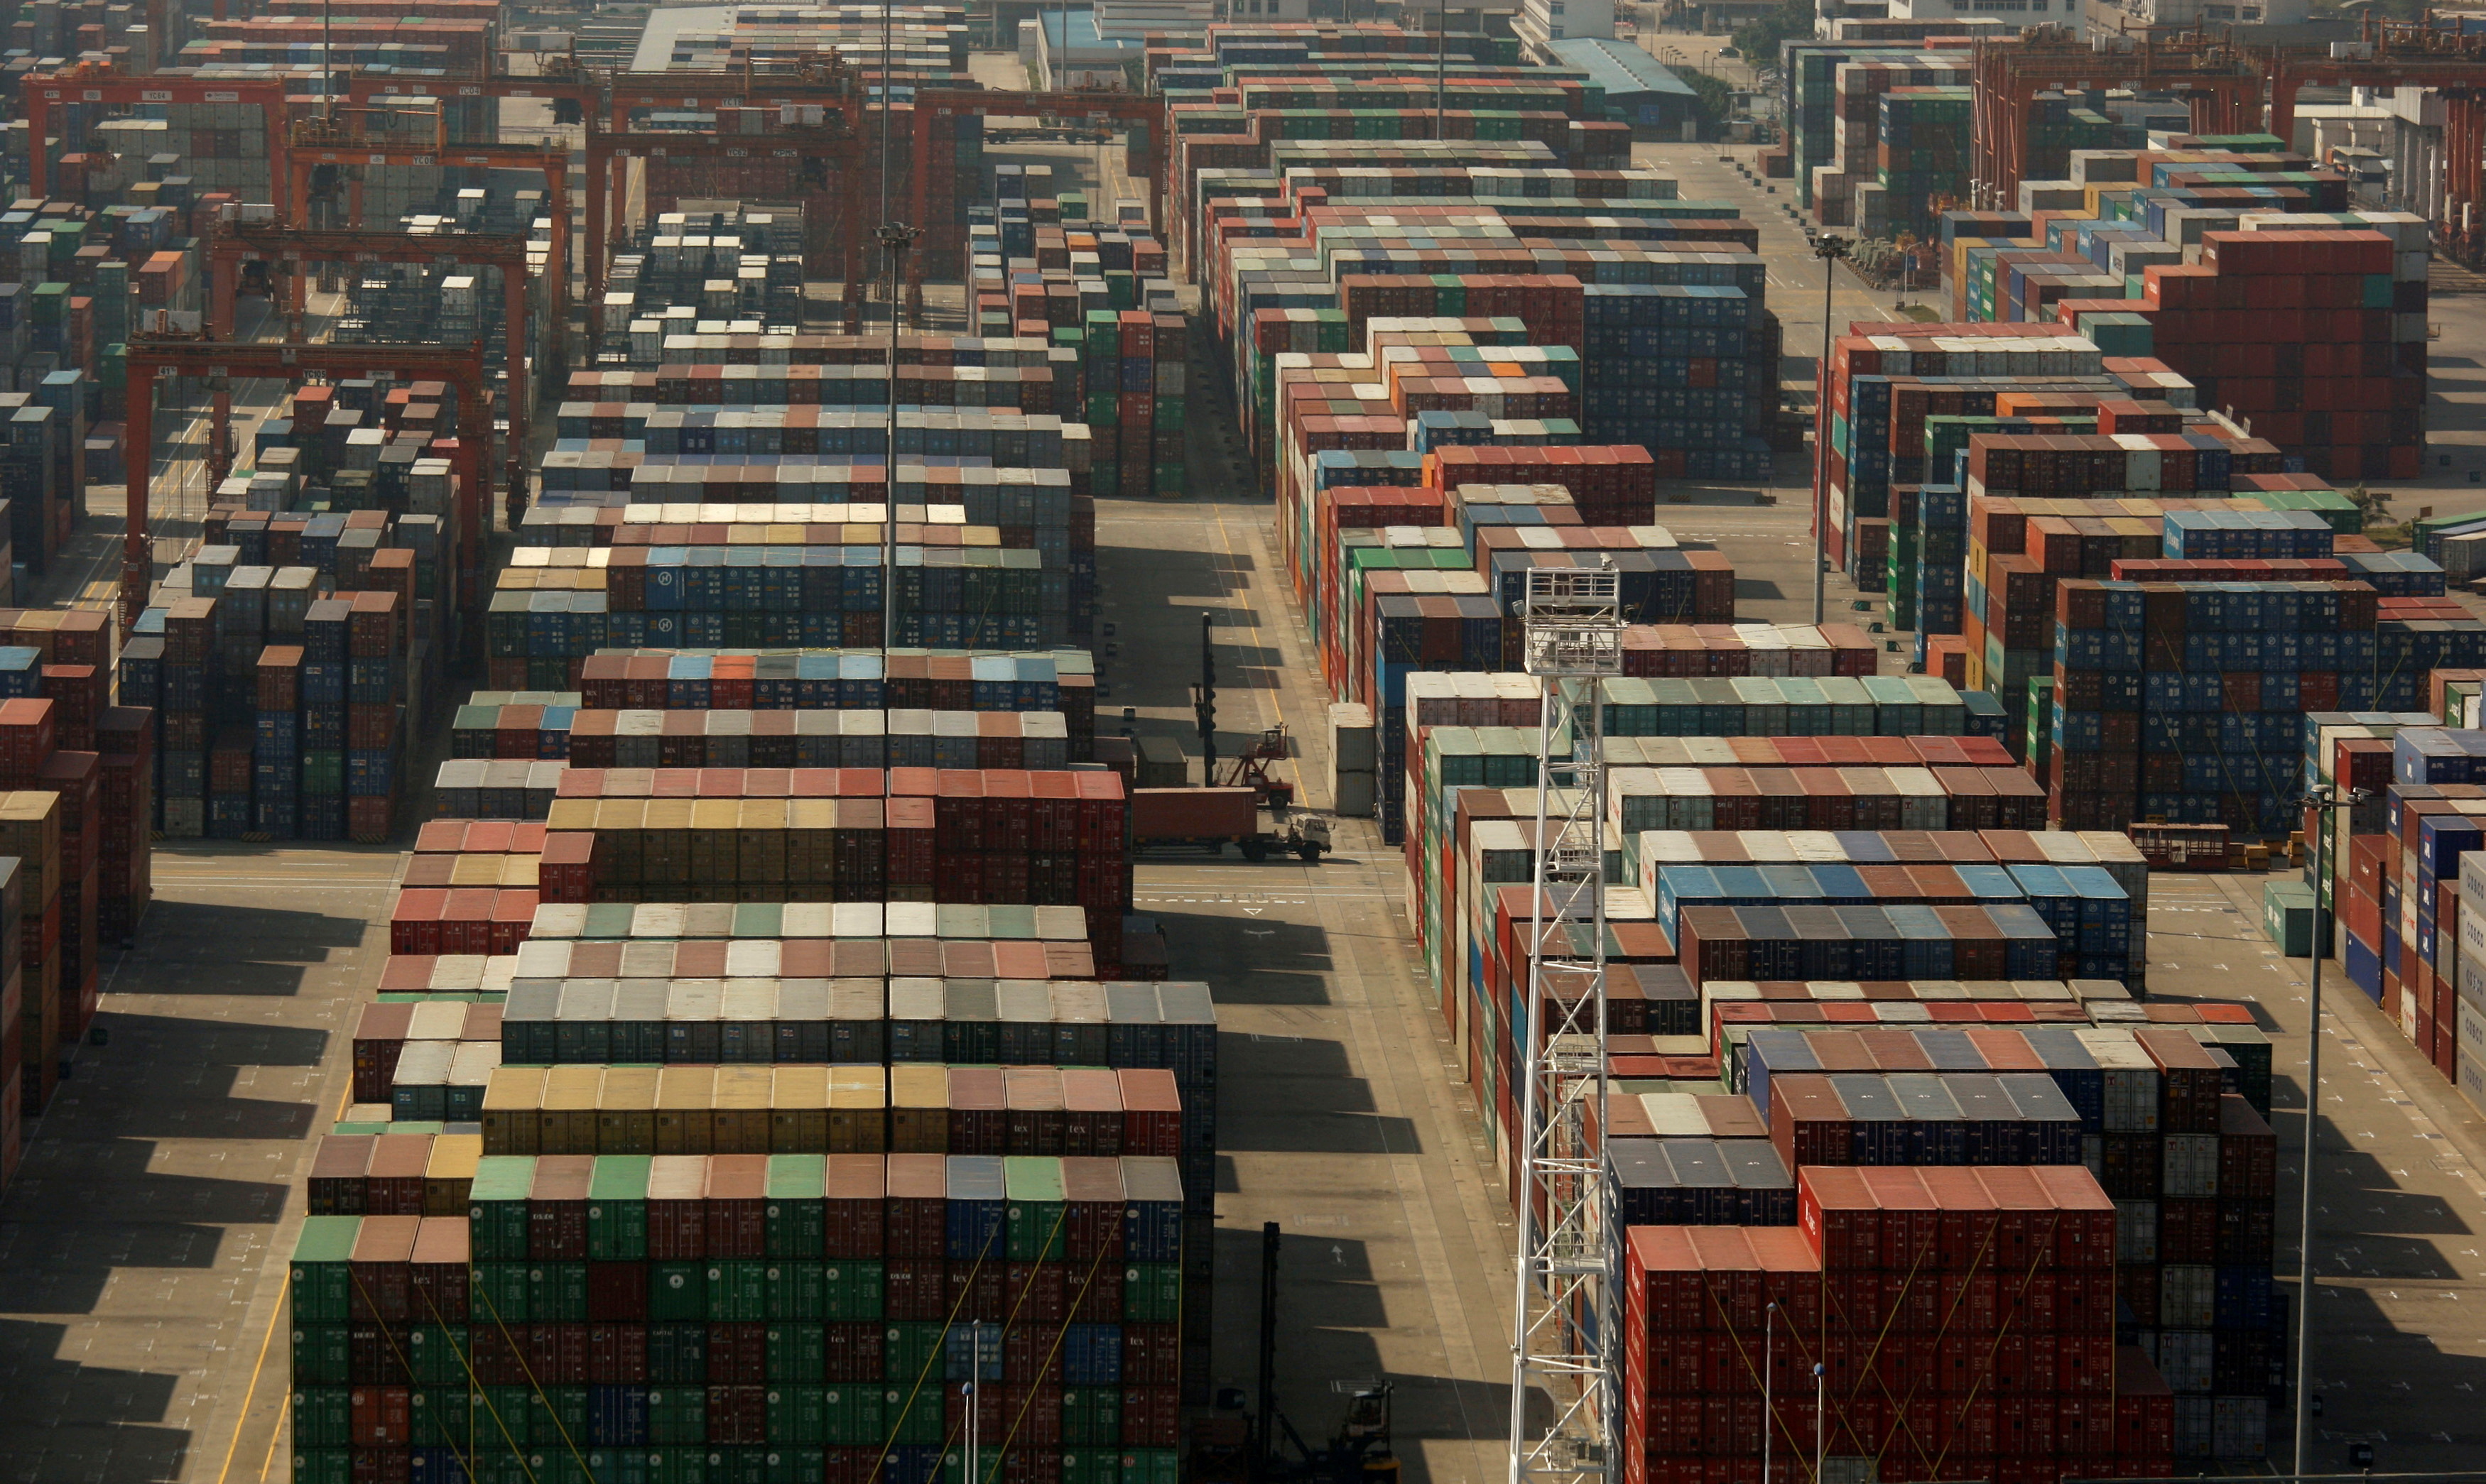 Containers are seen at the Yantian International Container Terminal in the southern Chinese city of Shenzhen